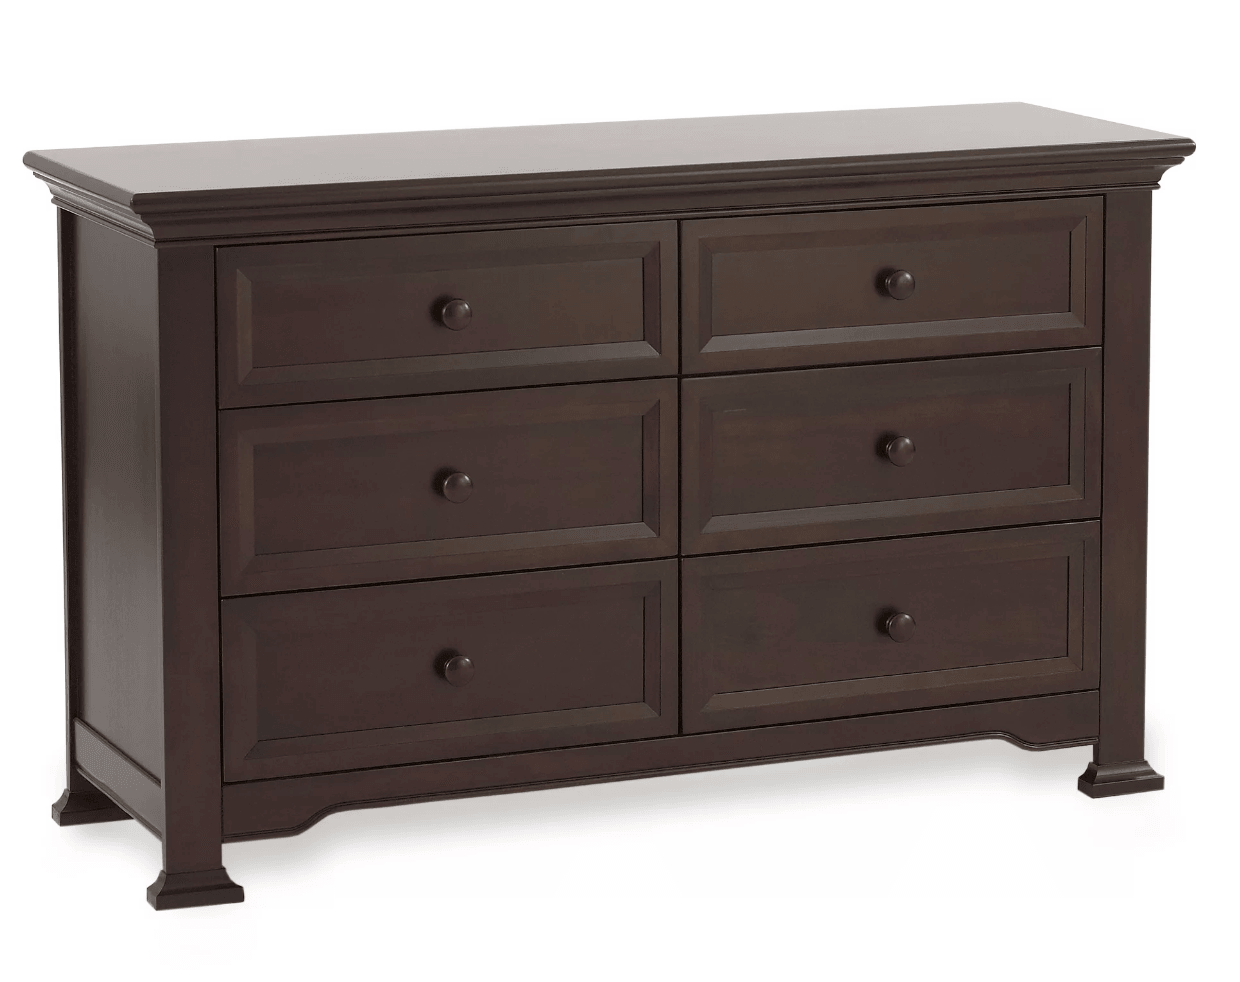 6-Drawer Double Dresser in Espresso - The Baby's Room